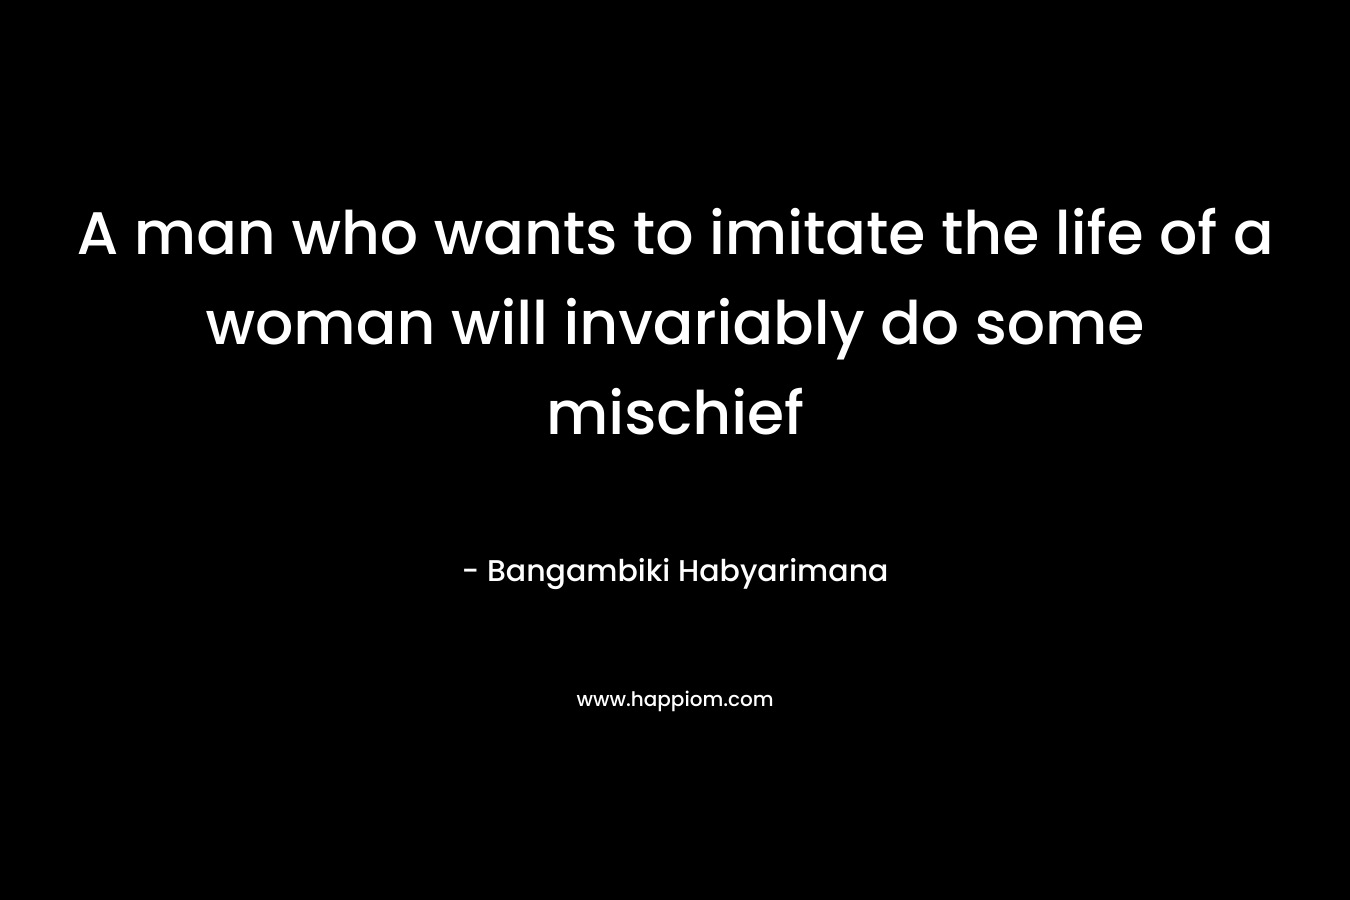 A man who wants to imitate the life of a woman will invariably do some mischief – Bangambiki Habyarimana